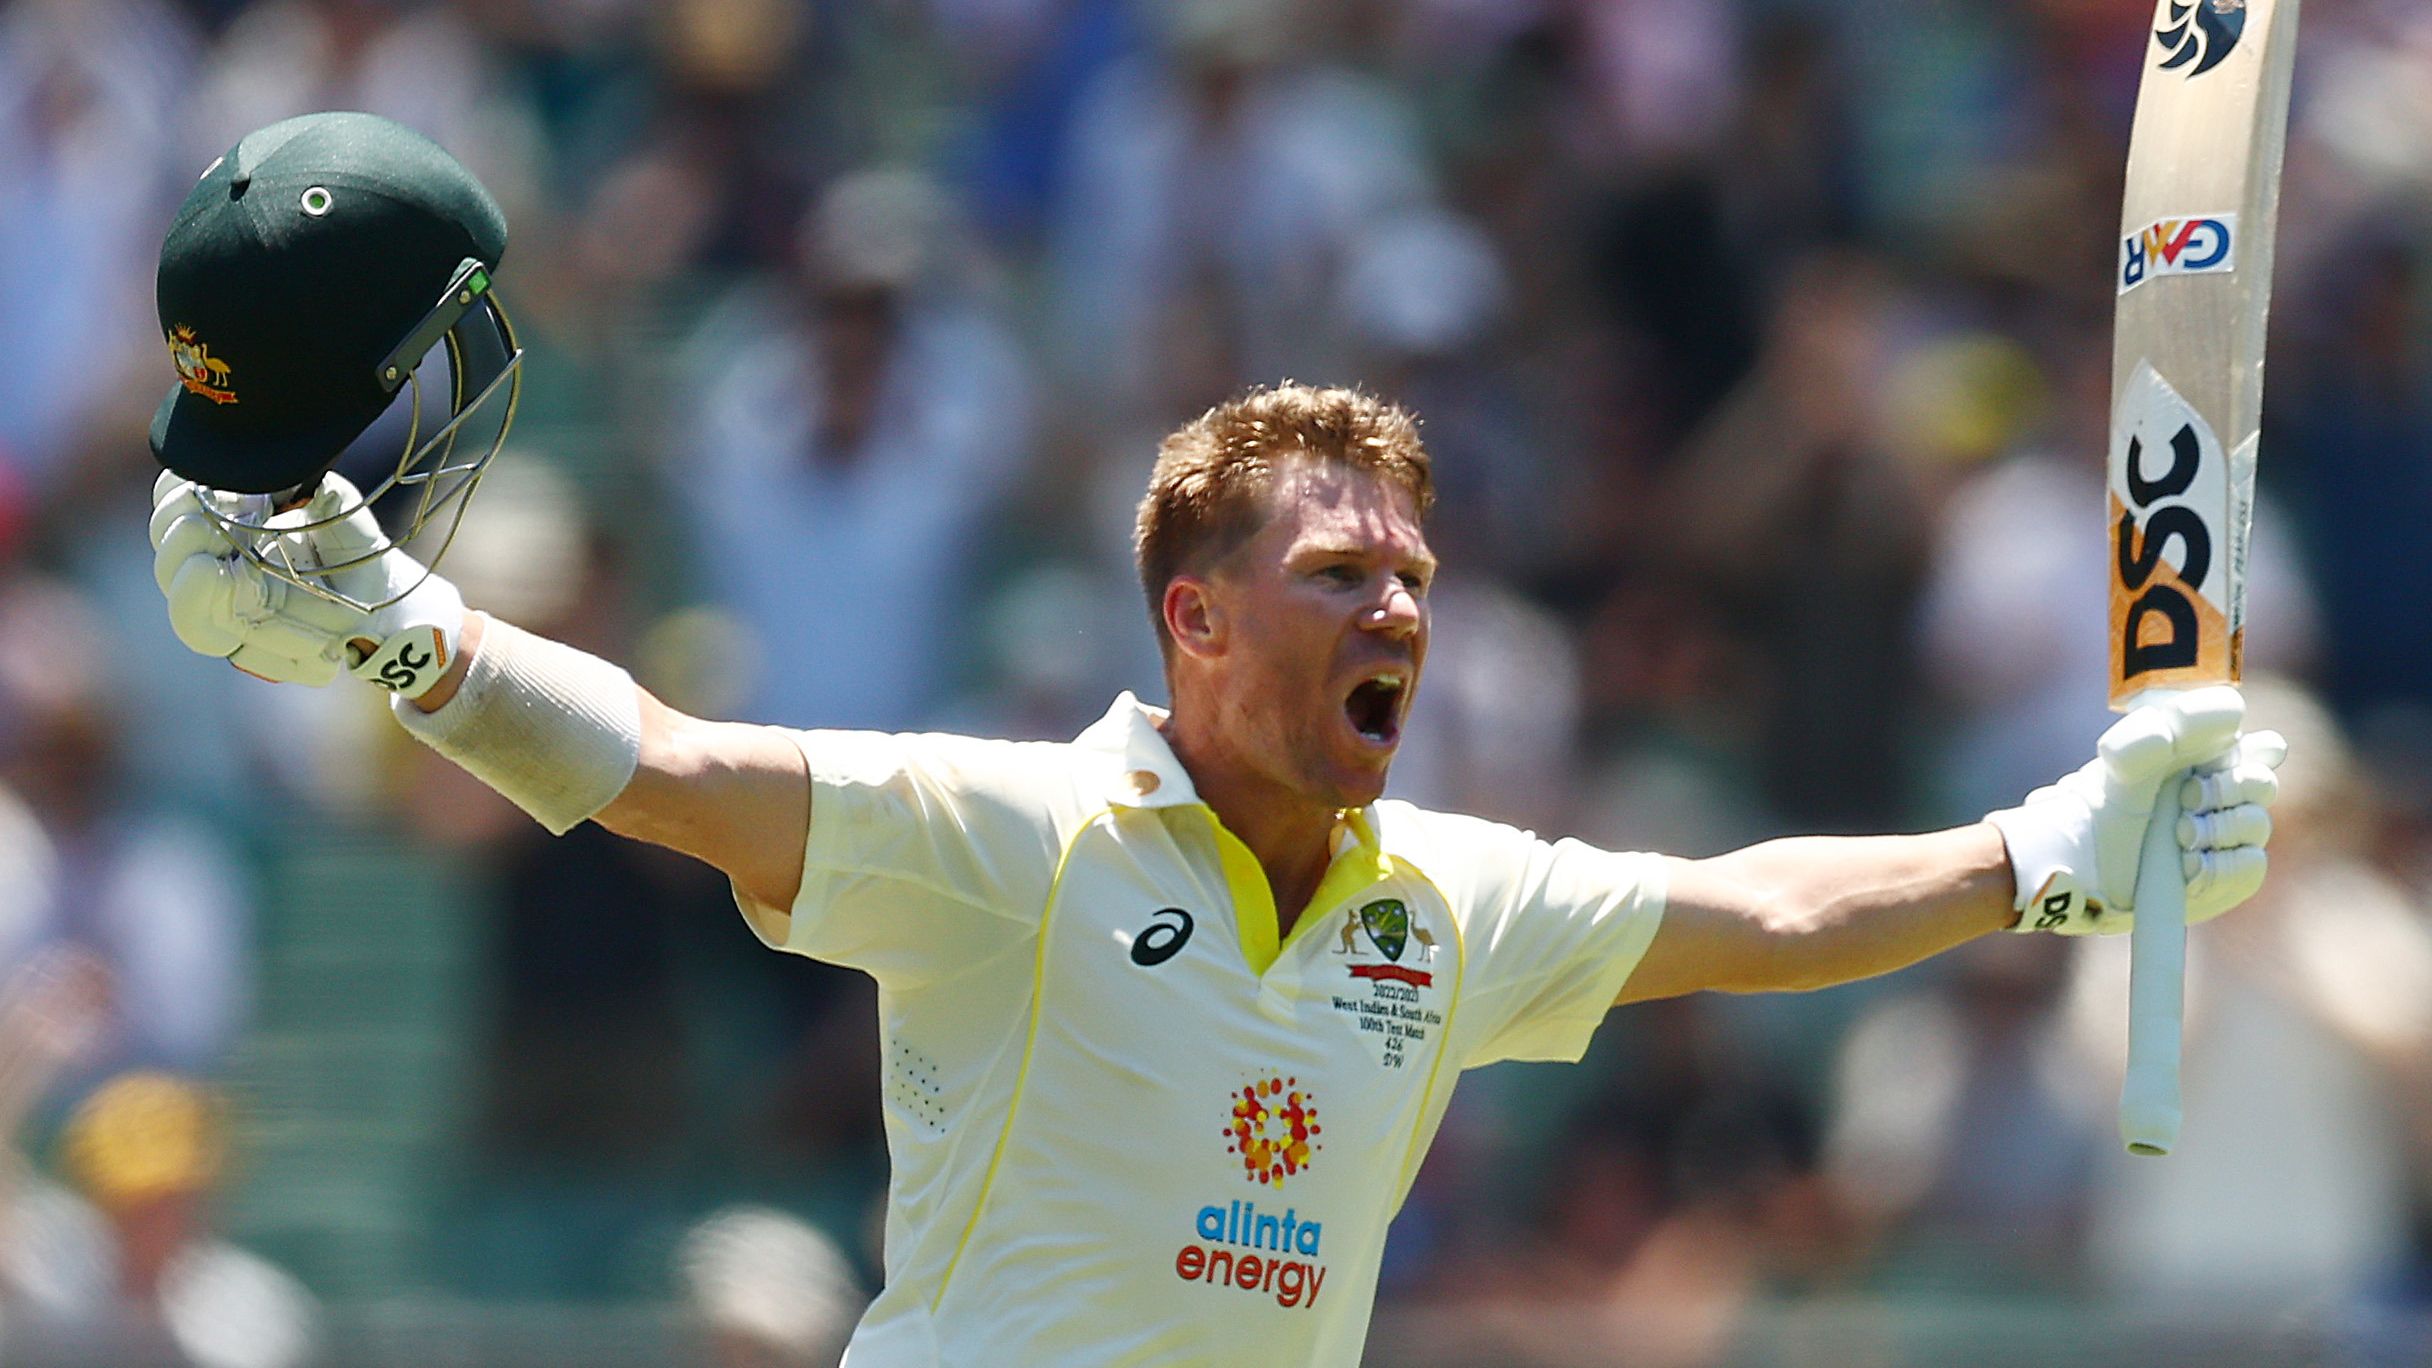 MELBOURNE, AUSTRALIA - DECEMBER 27: David Warner of Australia celebrates his century during day two of the Second Test match in the series between Australia and South Africa at Melbourne Cricket Ground on December 27, 2022 in Melbourne, Australia. (Photo by Graham Denholm - CA/Cricket Australia via Getty Images)